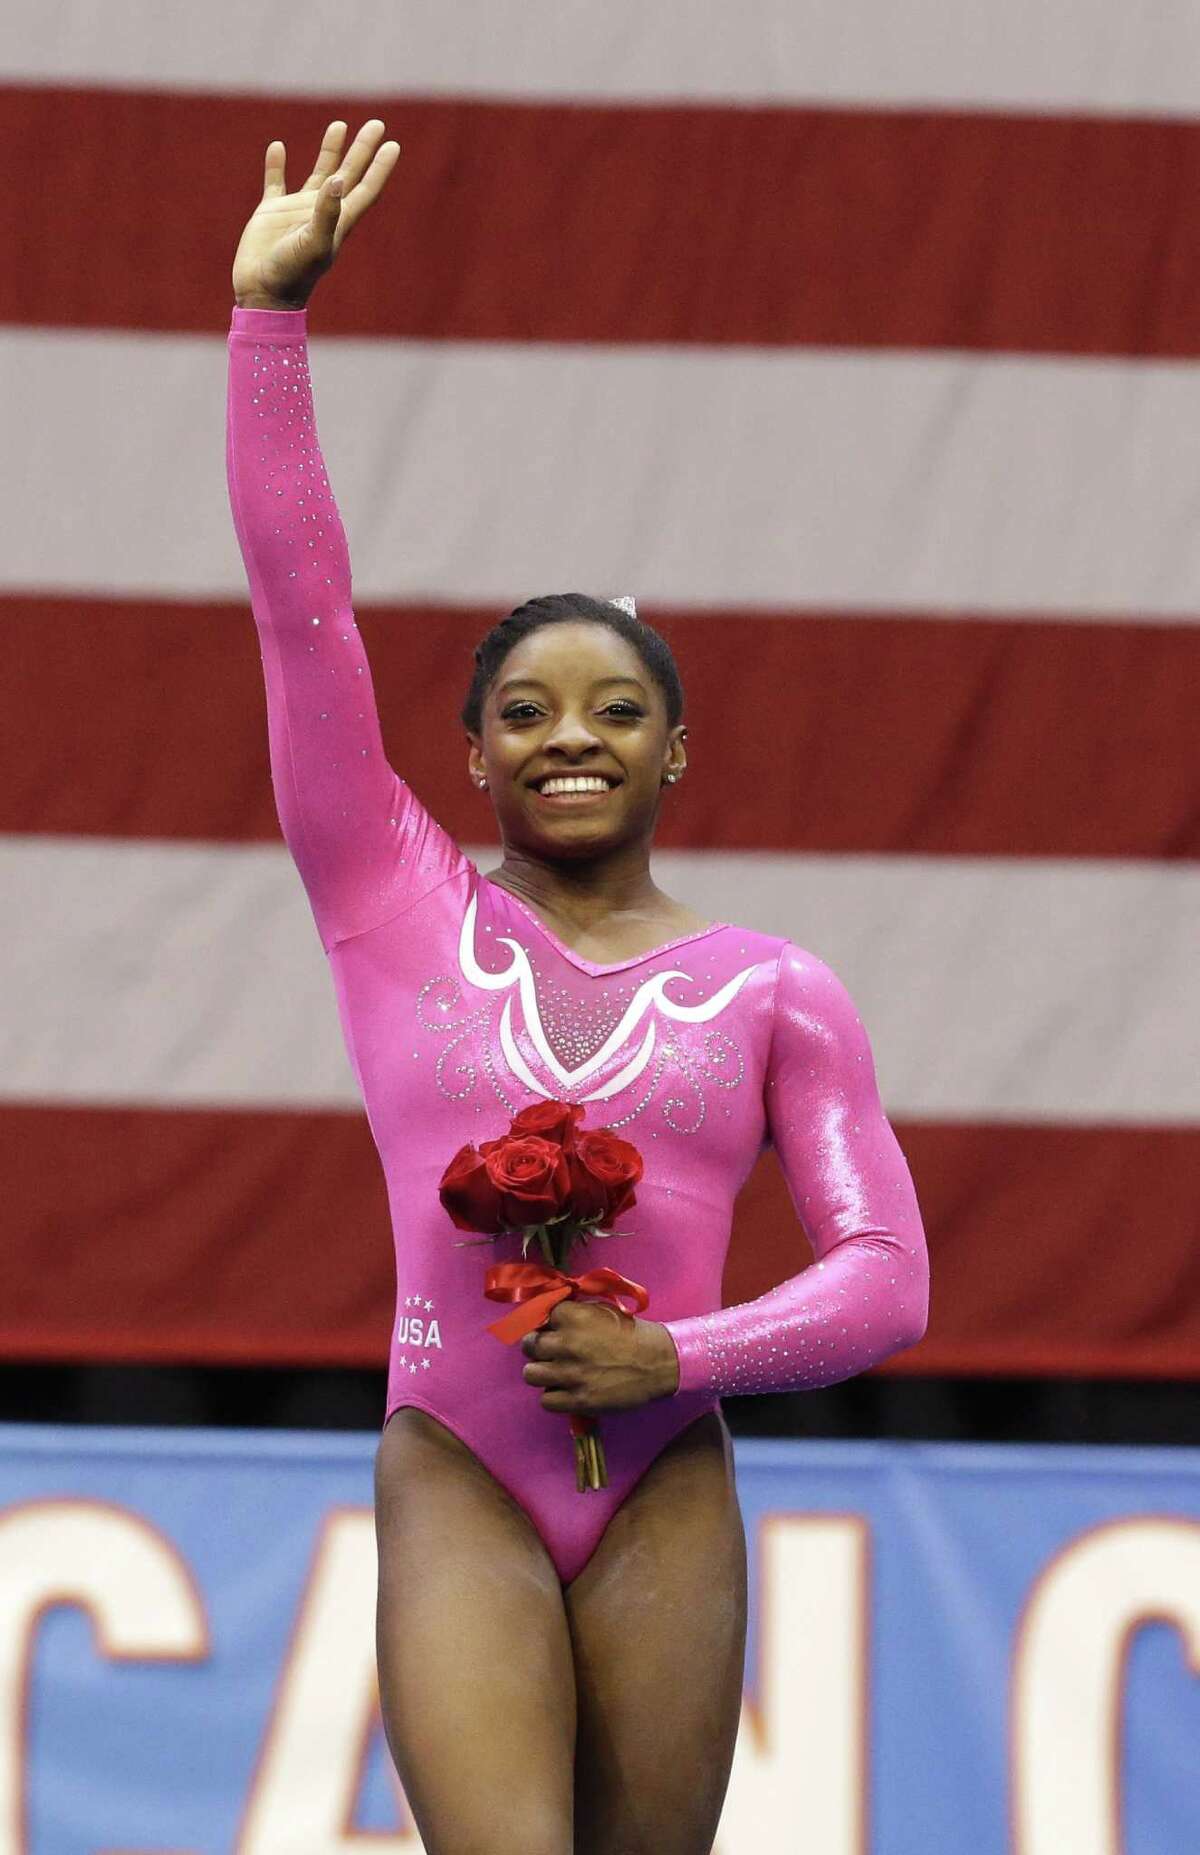 Simone Biles will unveil new routines in floor exercise and uneven bars at Saturday's USA Gymnastics meet in Chicago.